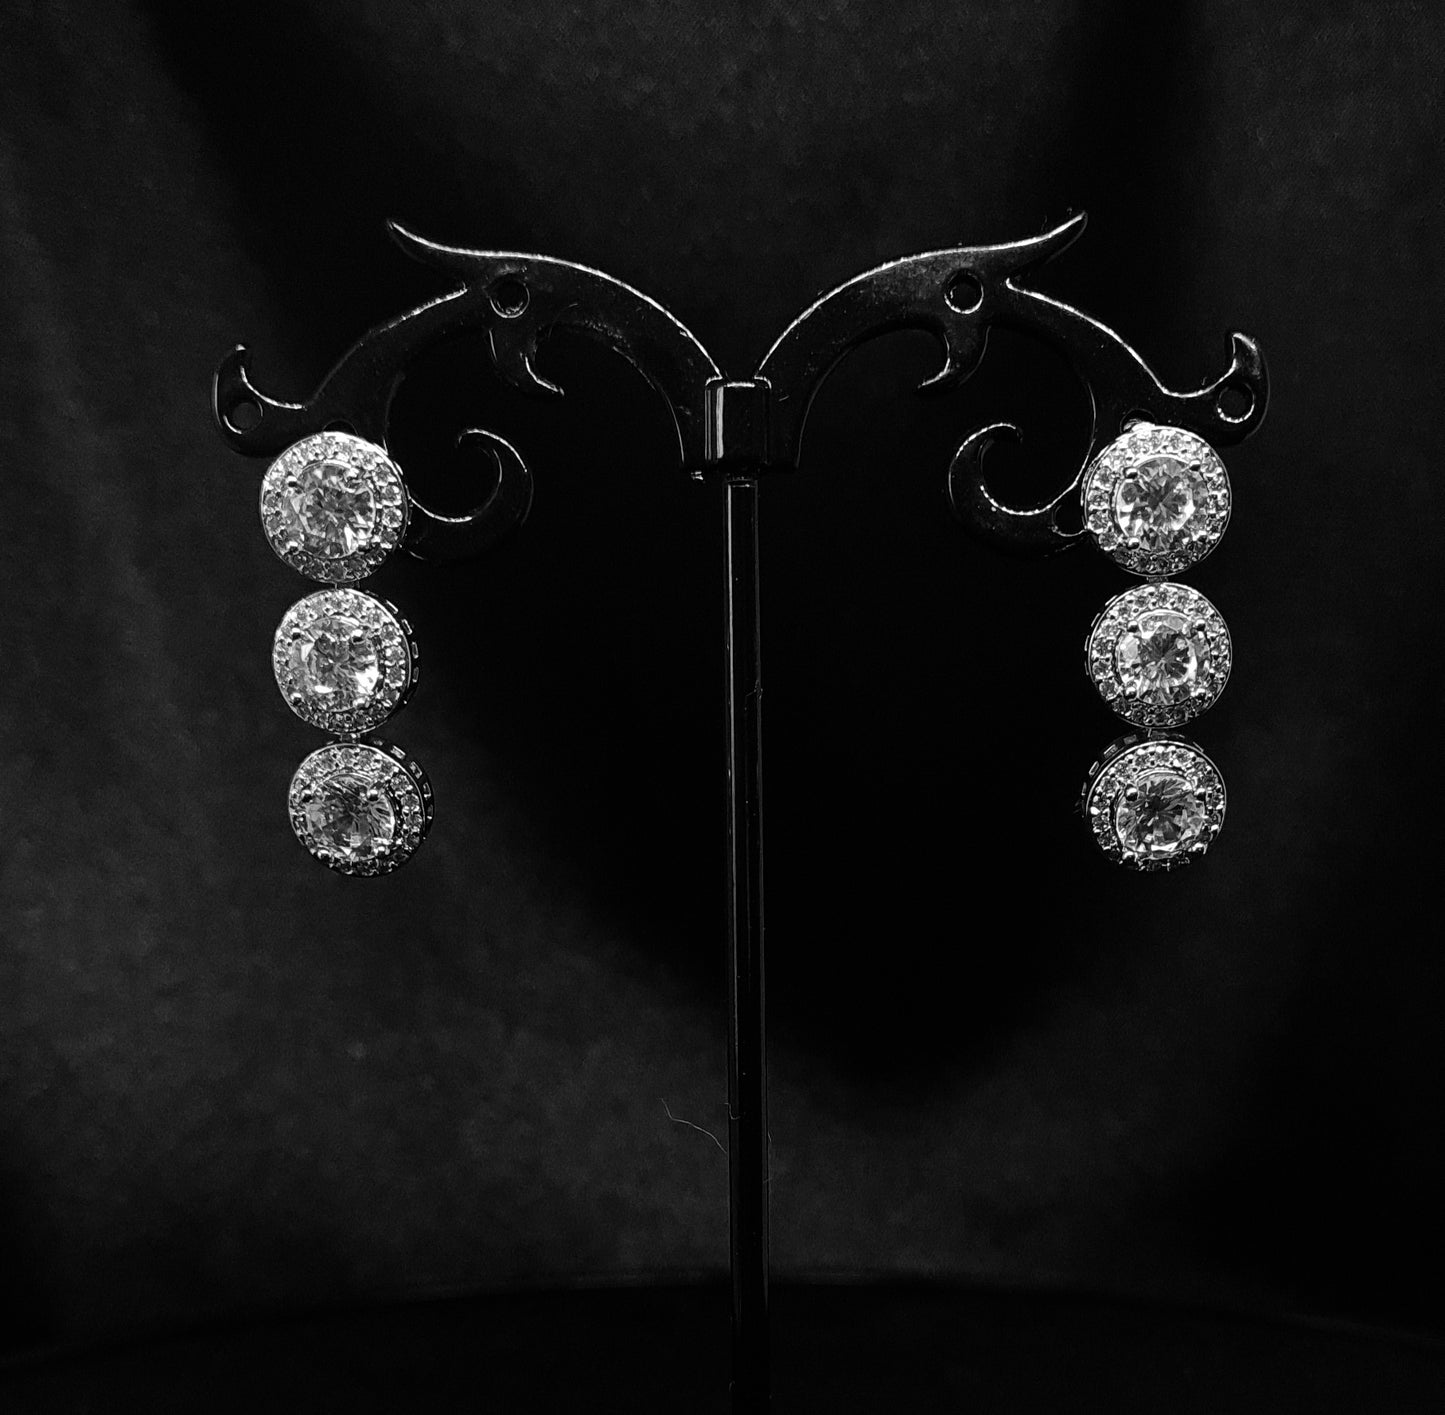 A pair of dangle earrings made of cubic zirconia. The earrings are round-shaped and have a simple, elegant design. The cubic zirconia stones are clear and sparkling. The earrings are hanging from a black metal wire.